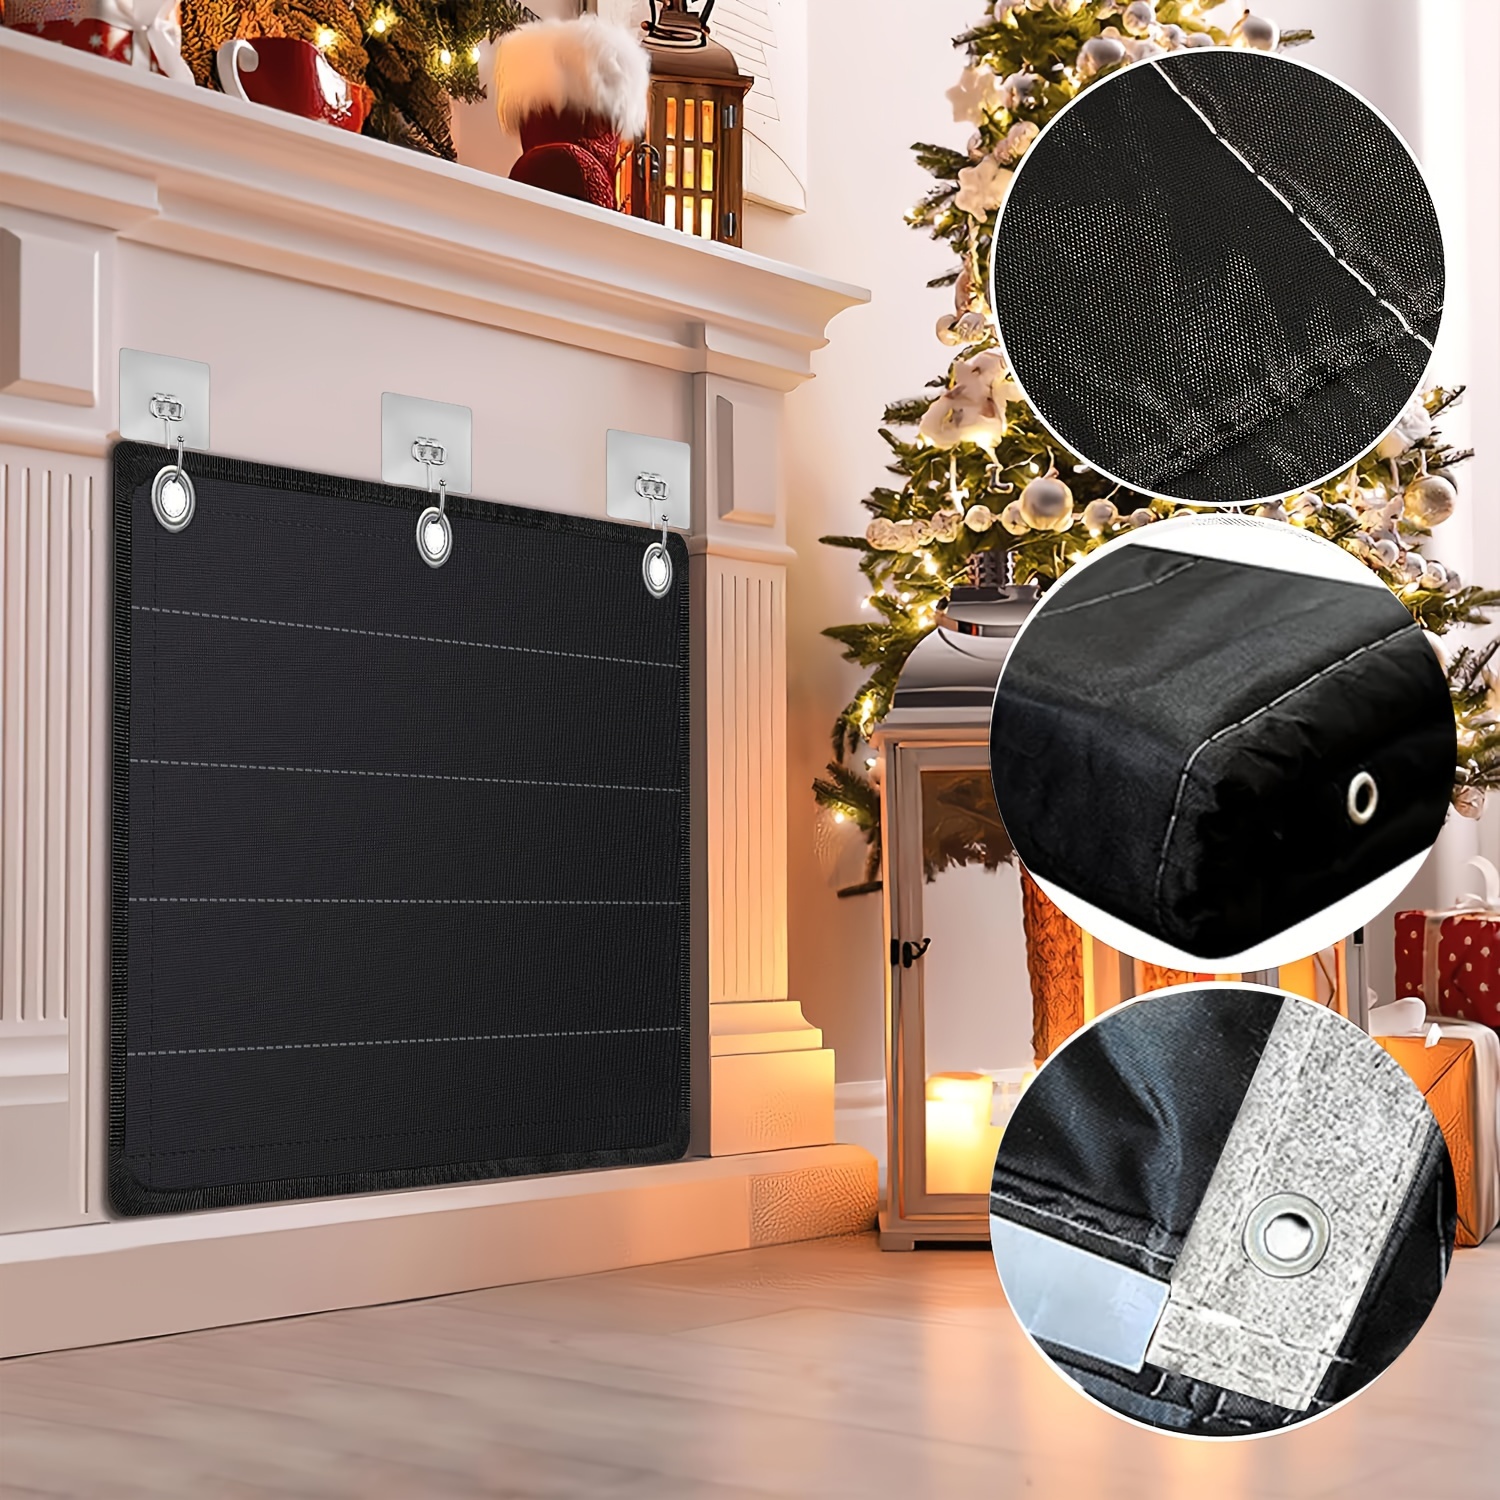  Christmas Magnetic Fireplace Cover 36x27, Decorative  Fireplace Blanket Insulation Cover for Heat Loss, Indoor Outdoor Fireplace  Draft Stopper Covers Protectors, Winter Country Barn Snowman : Home &  Kitchen